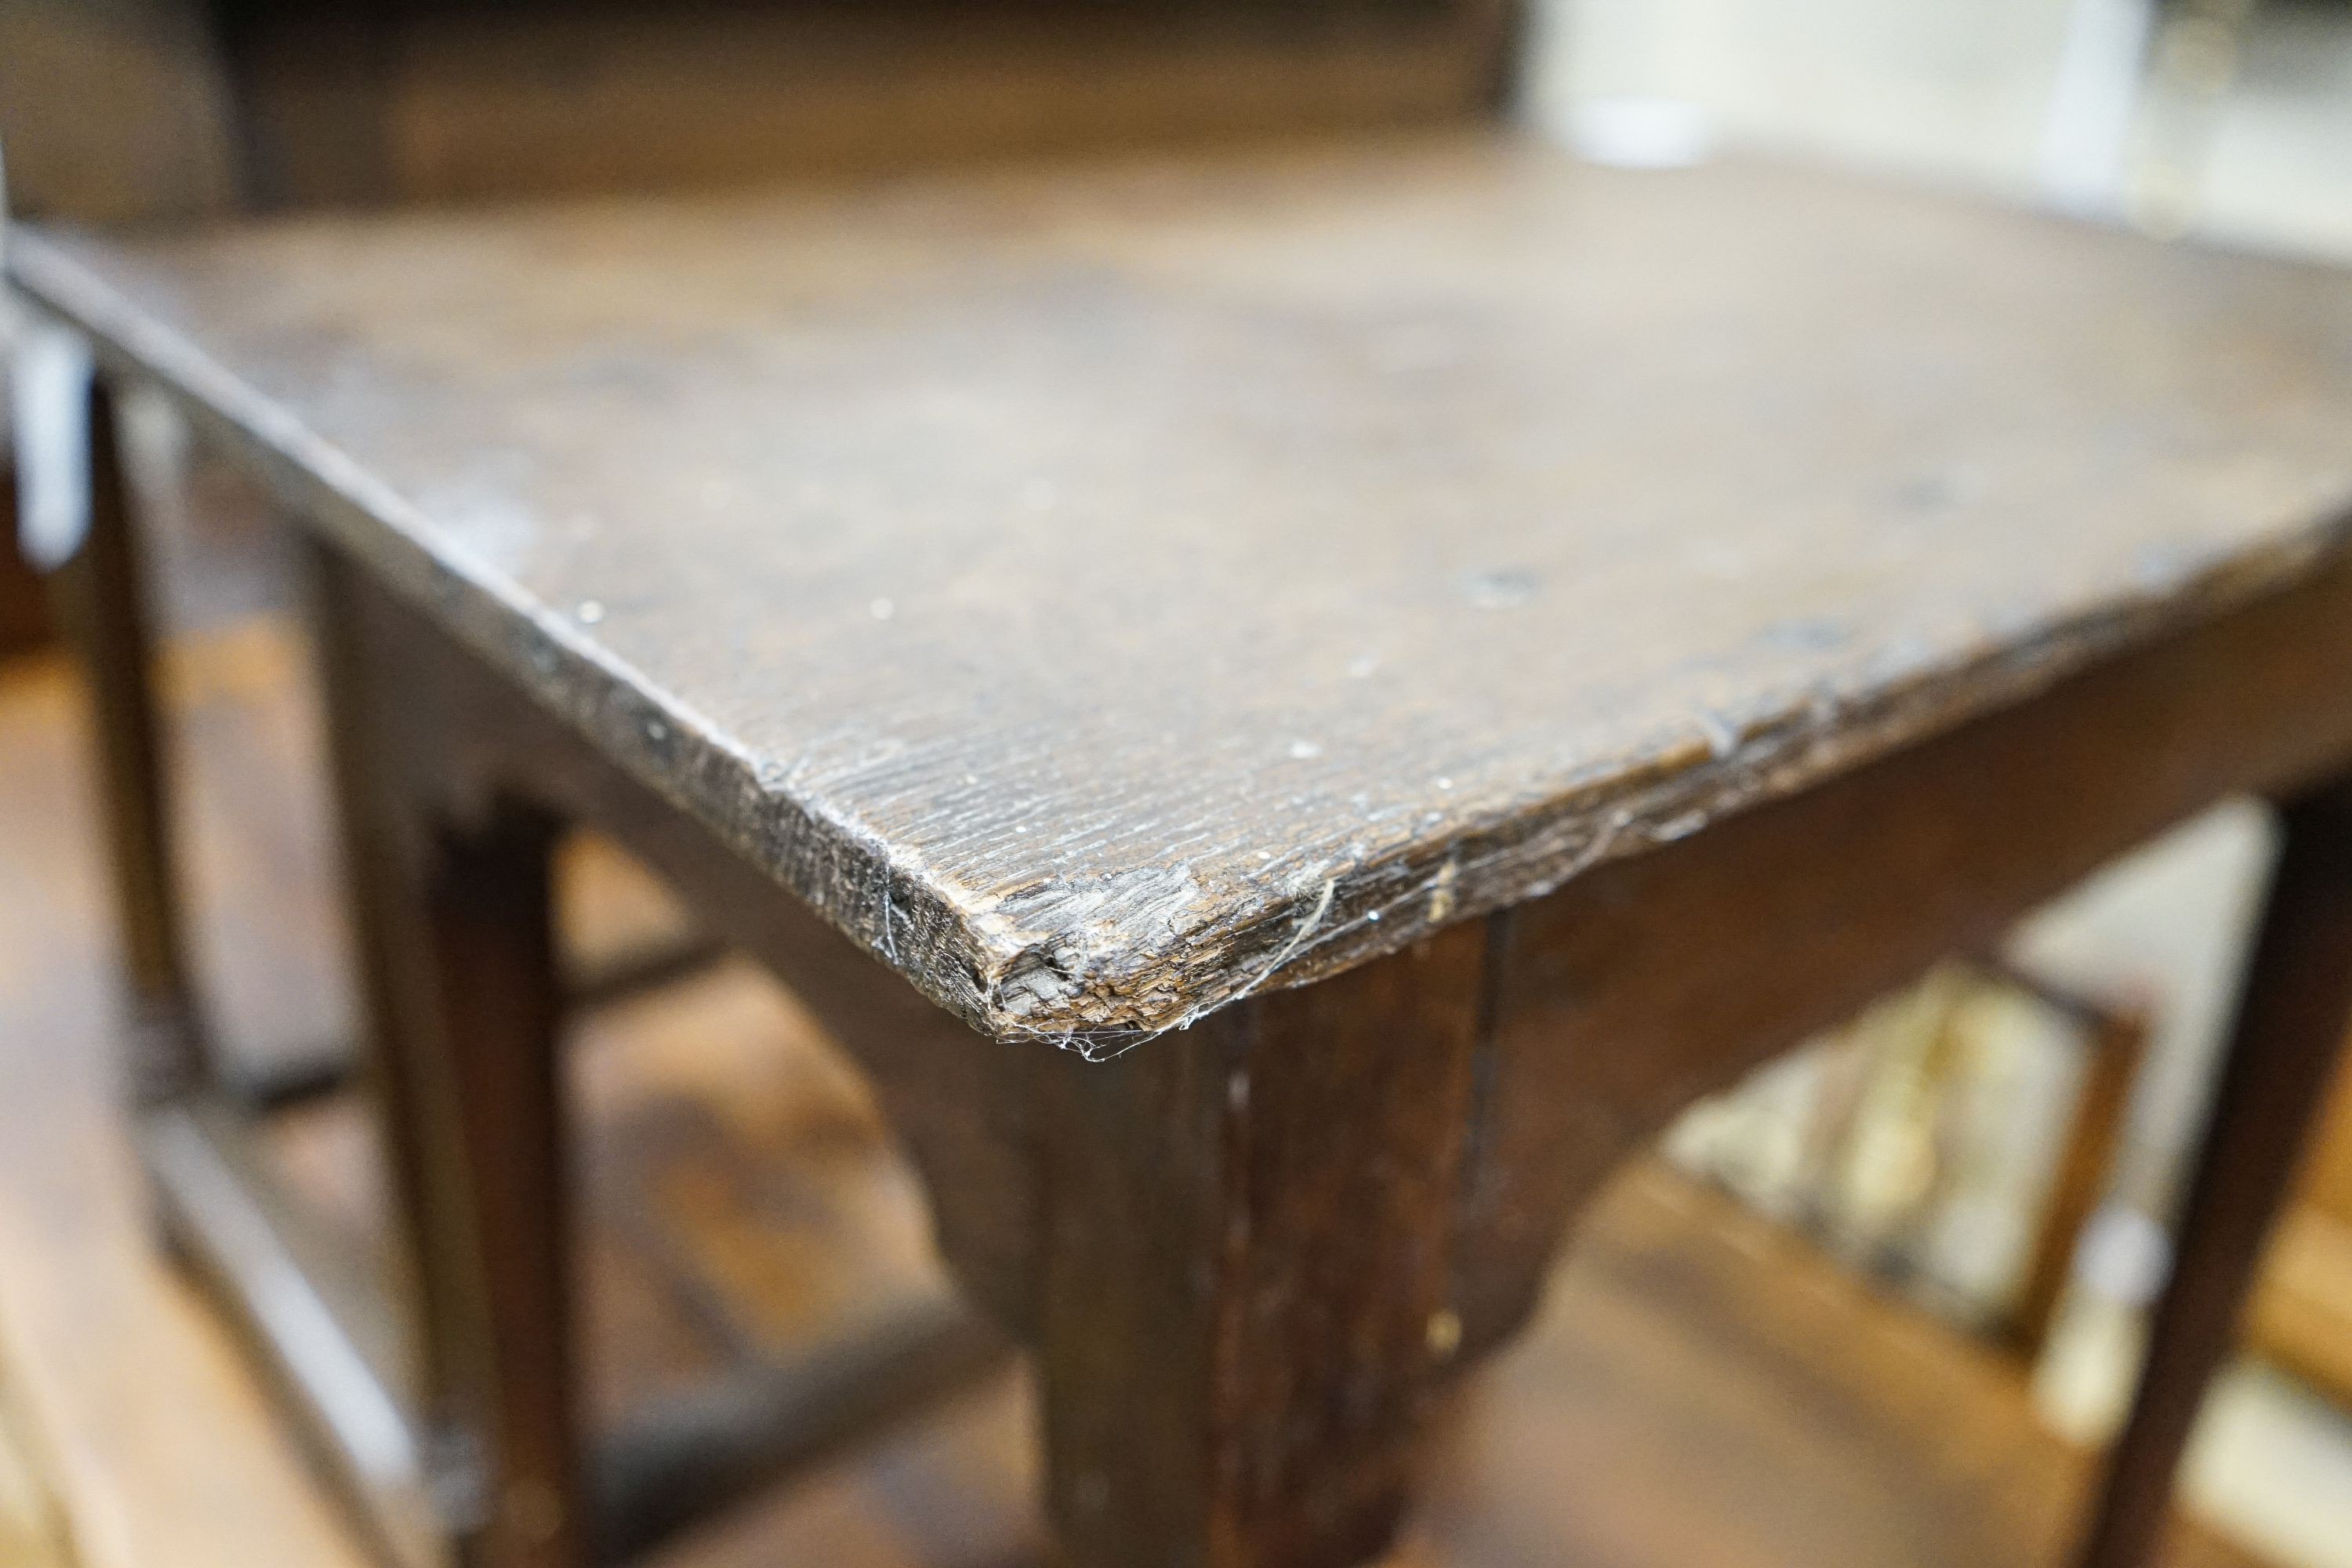 An early 18th century oak side table, with turned legs and pad feet, width 58cm and a 17th century style oak side table, width 55cm, depth 36cm, height 61cm